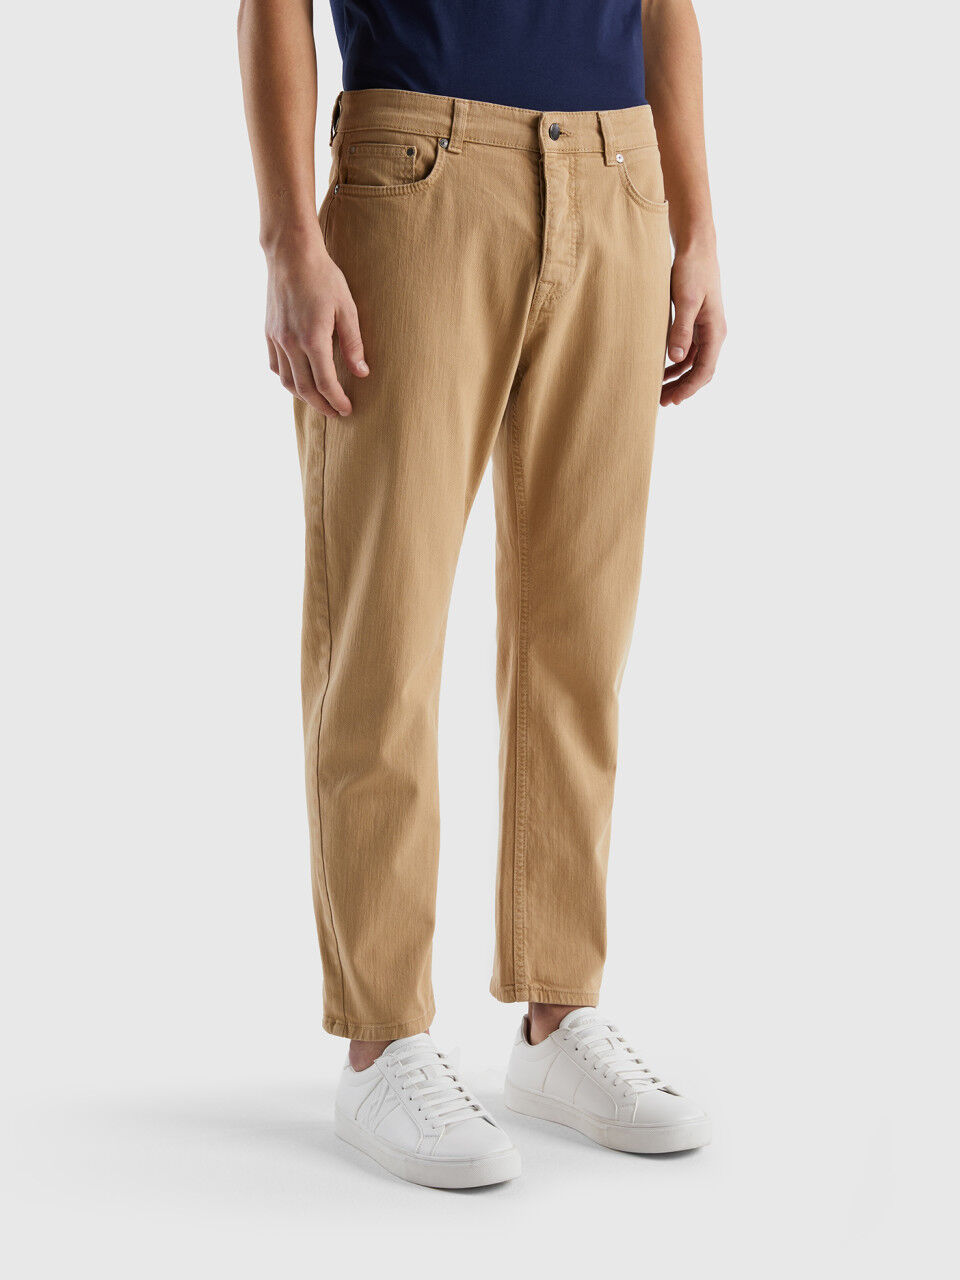 Mens AMI Paris brown Carrot-Fit Trousers | Harrods # {CountryCode}